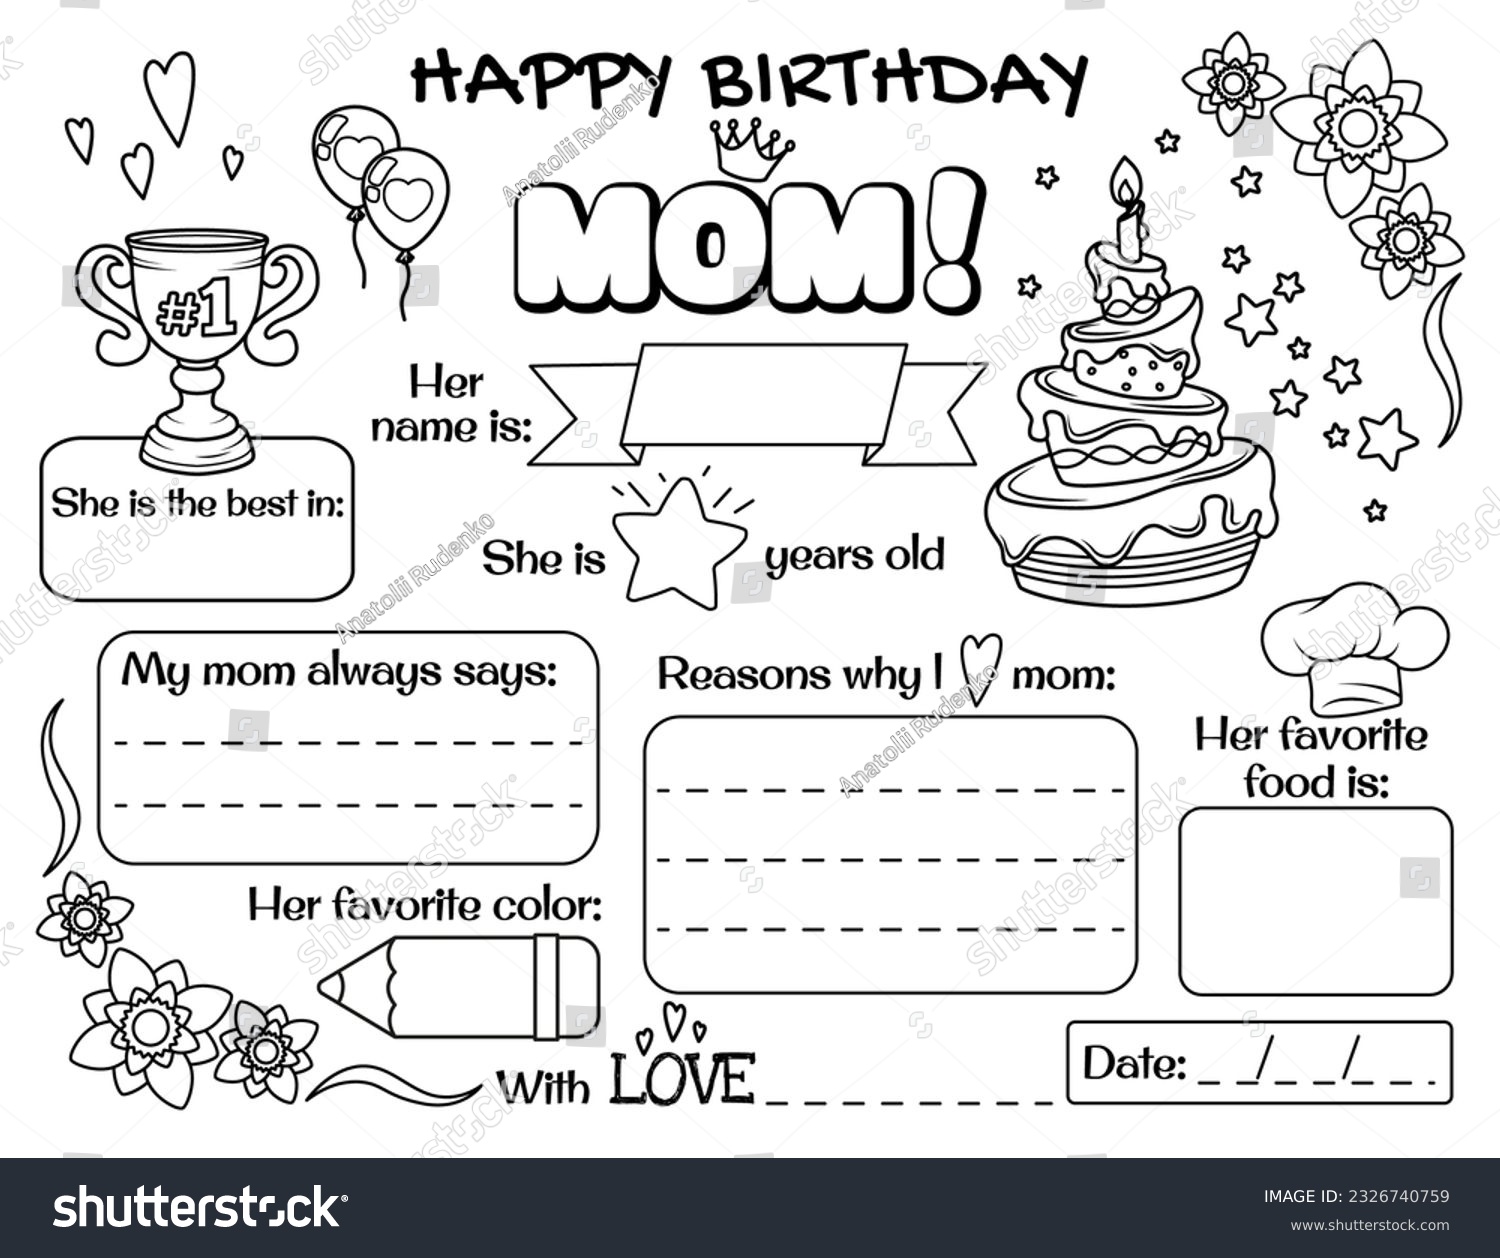 Printable coloring birthday cards mom images stock photos d objects vectors